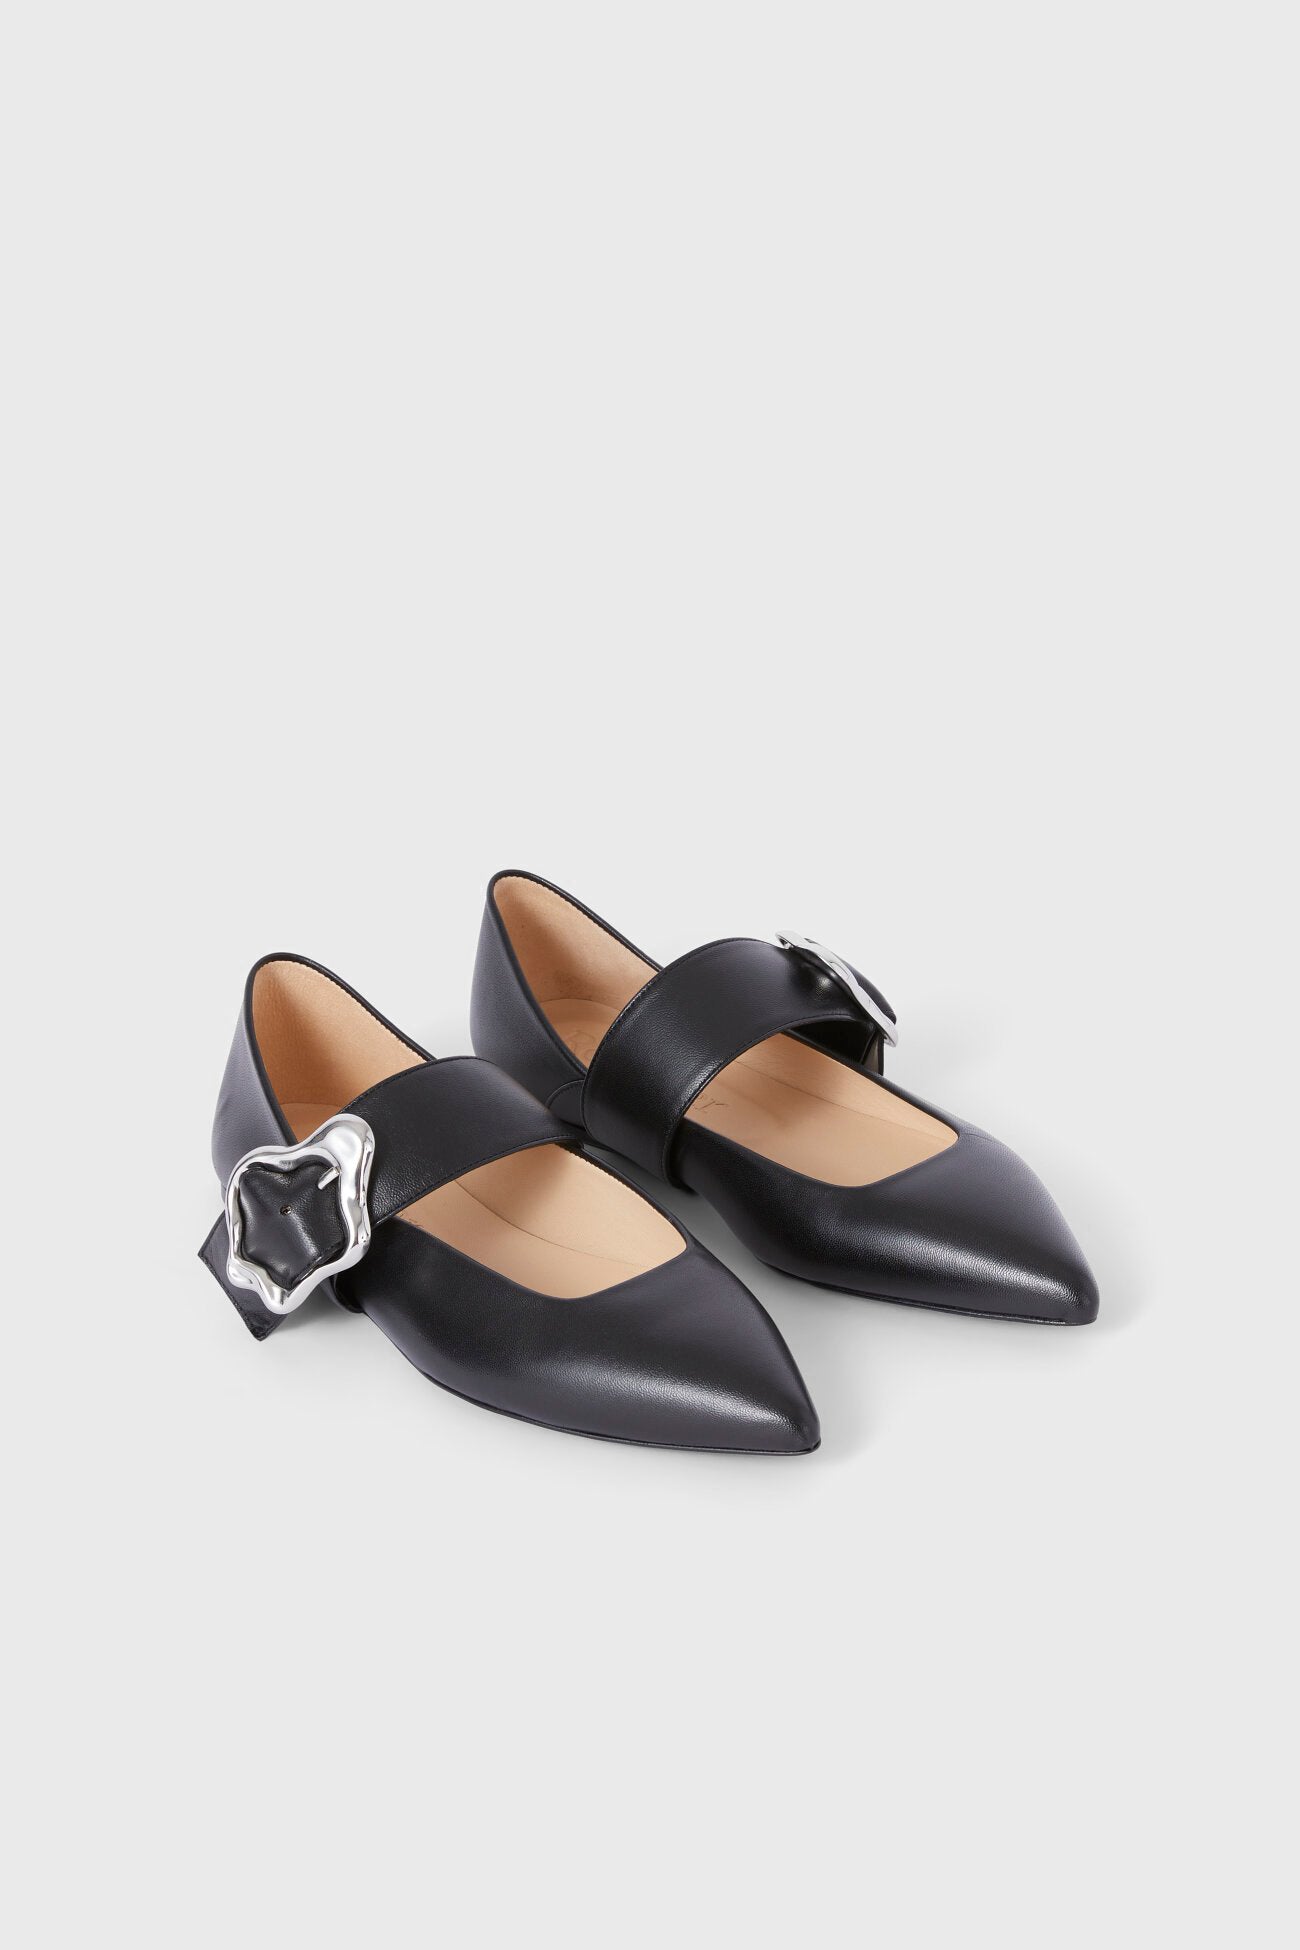  Aura Coral Flats in Black by Rodebjer